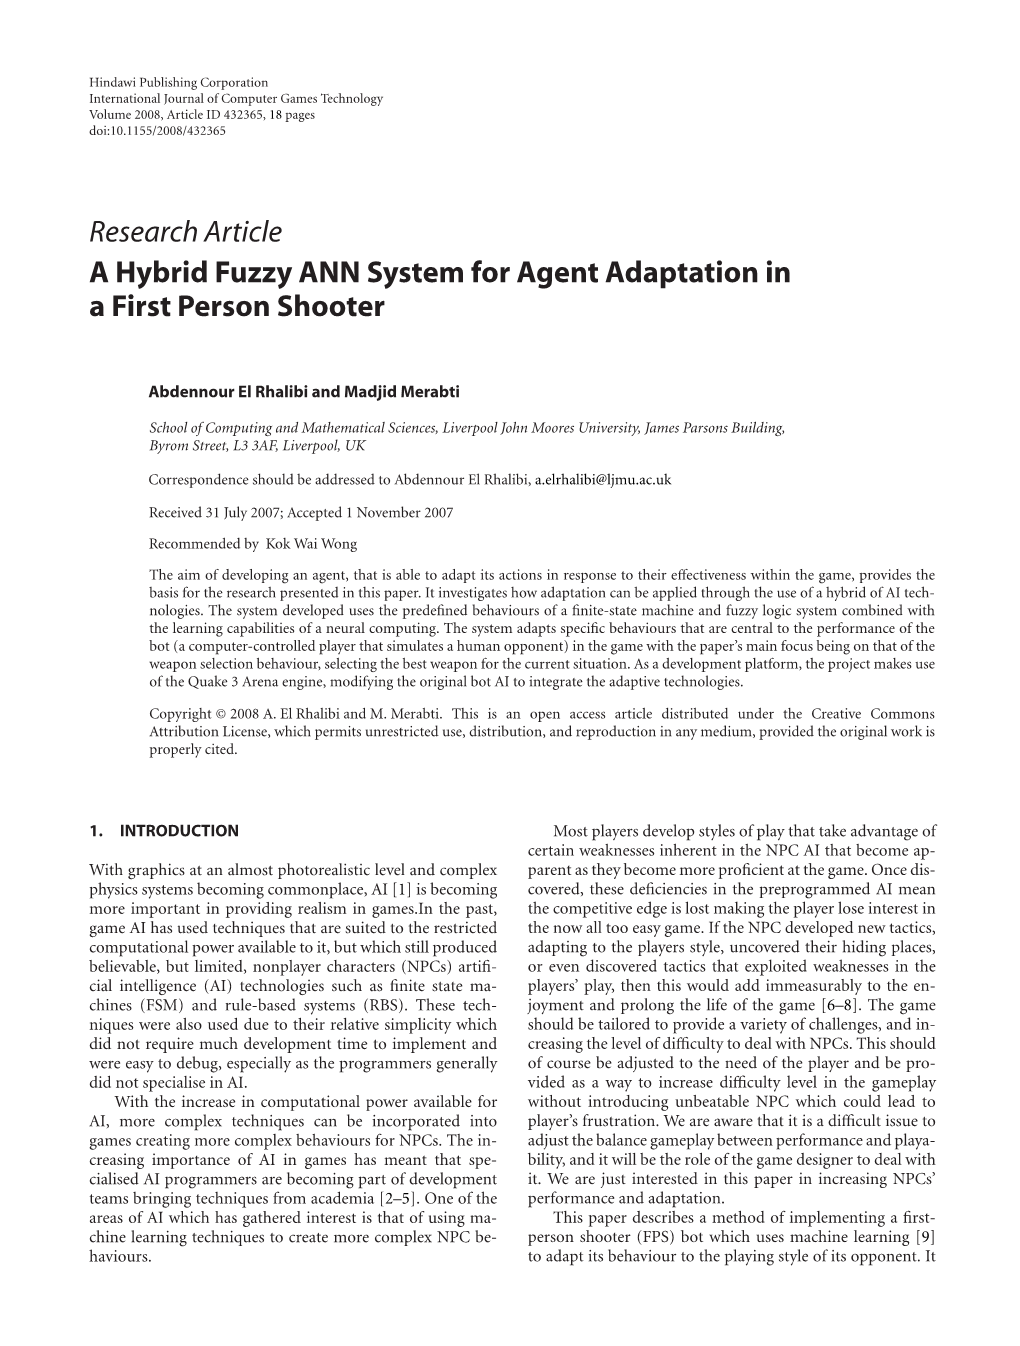 A Hybrid Fuzzy ANN System for Agent Adaptation in a First Person Shooter